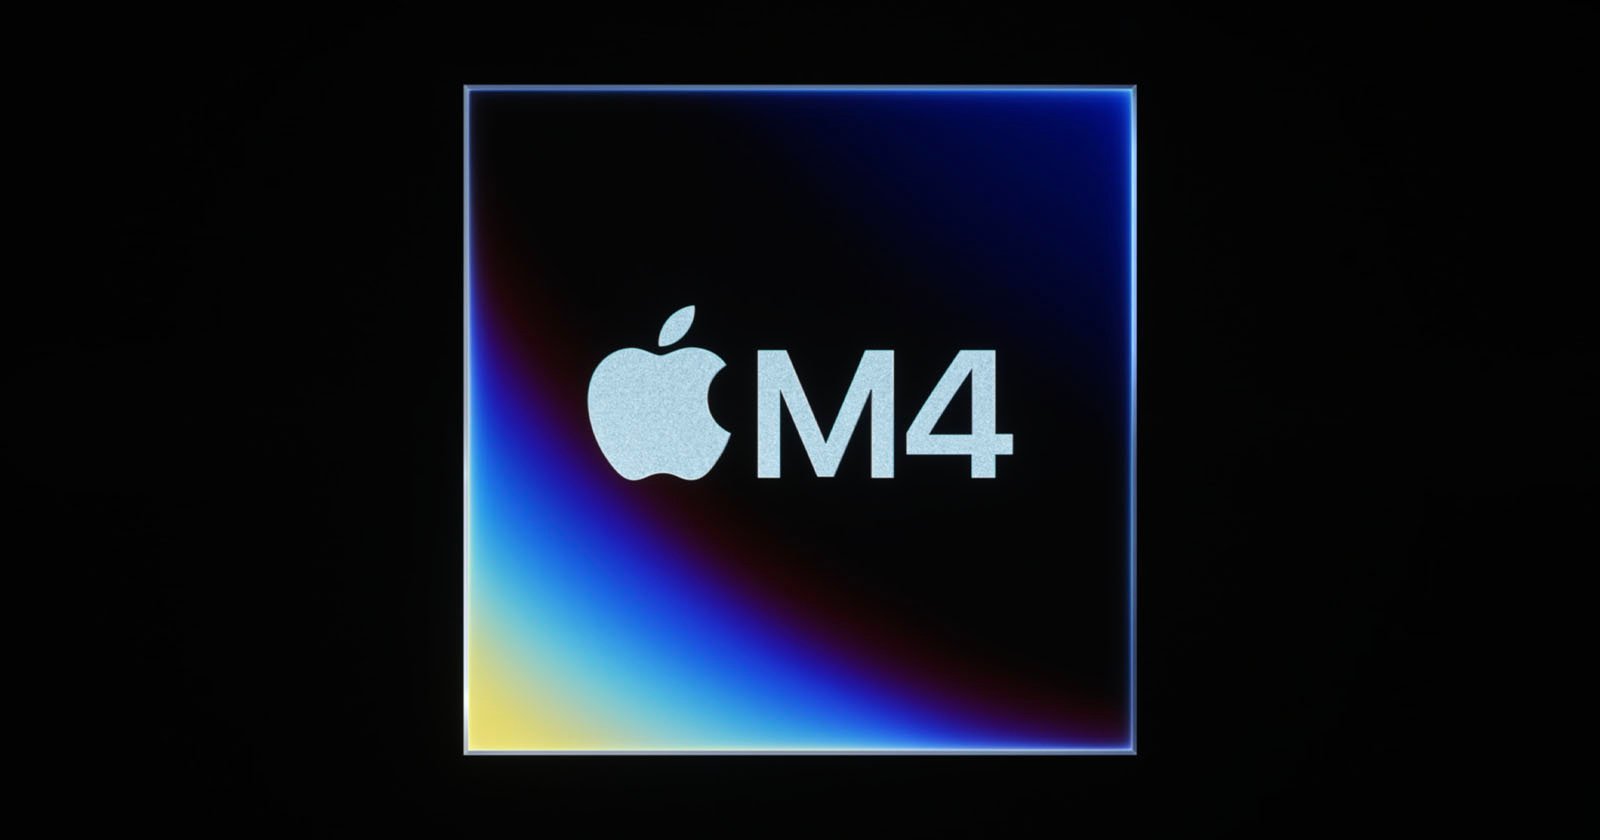 Logo featuring an apple icon with the text m4 on a gradient blue background, framed within a white square against a dark setting.